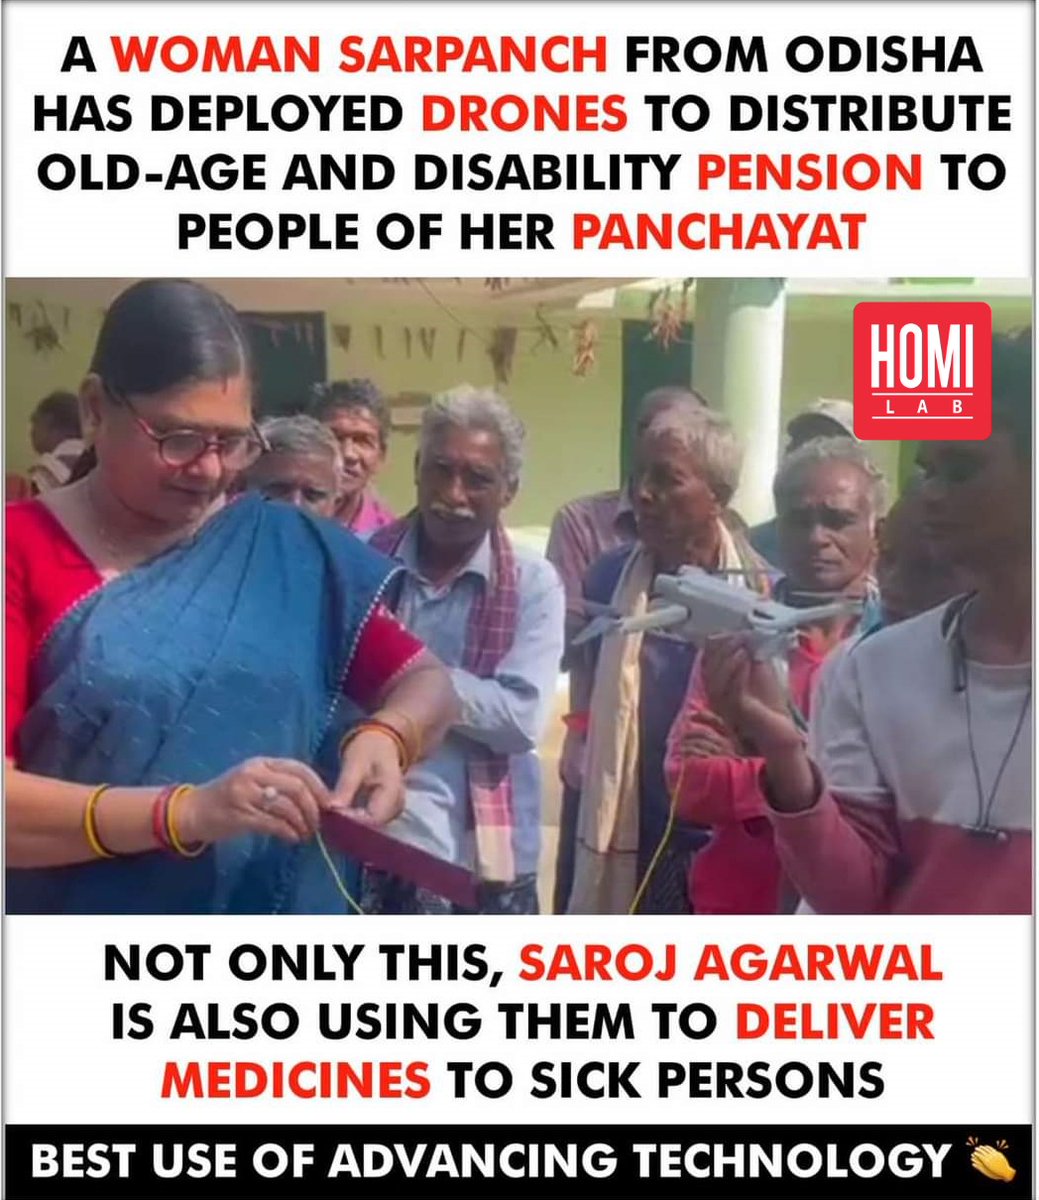 Saroj Agarwal, a Sarpanch from Odisha, uses drones to deliver pension to divyang doorstep. Empowering the marginalized with innovation! #CommunityEmpowerment #TechnologyForGood #Innovation #Sarpanch #Divyang #PensionScheme #DroneDelivery